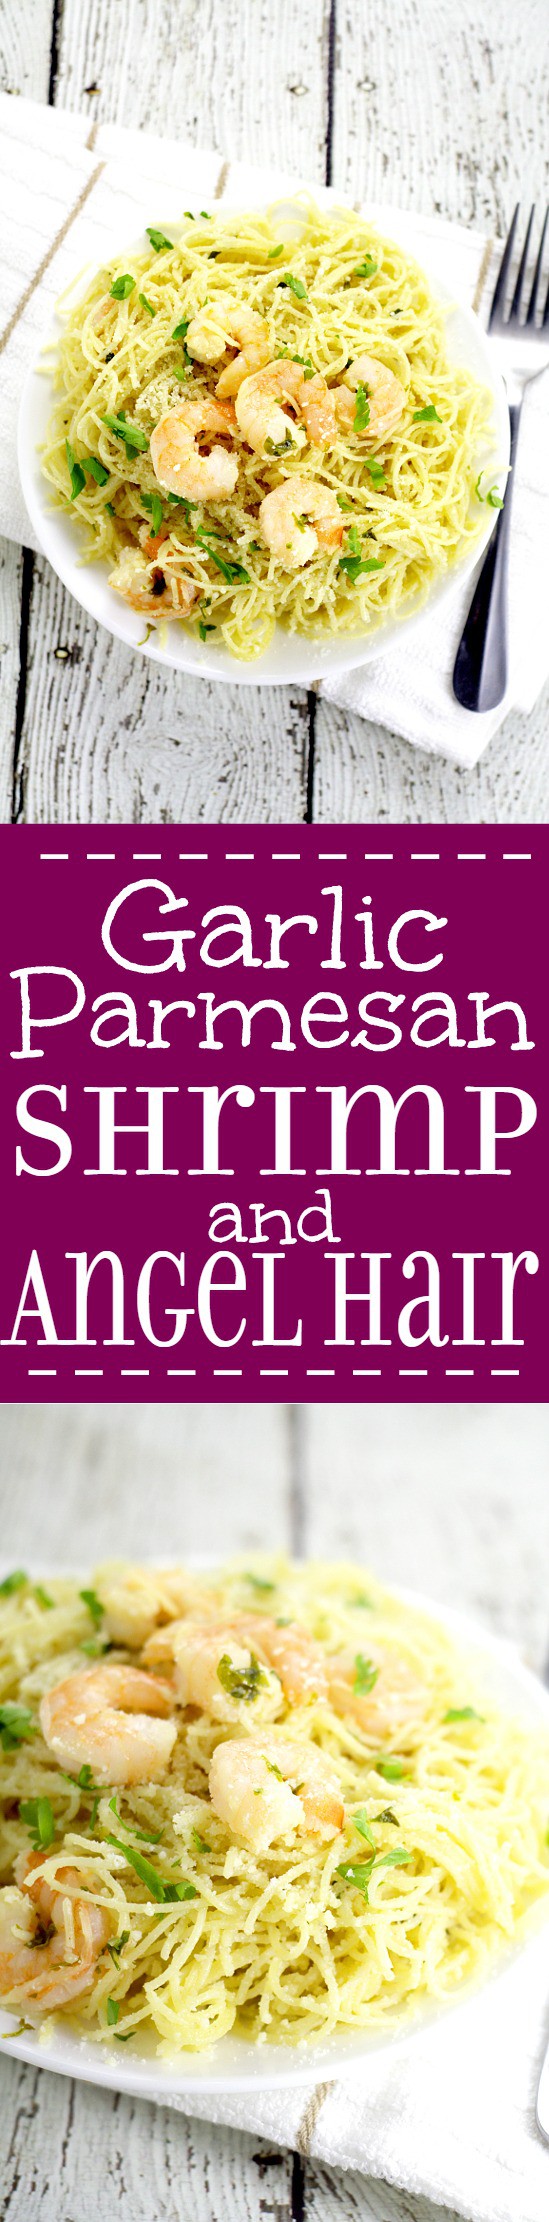 Garlic Parmesan Shrimp and Angel Hair pasta makes a delicious family meal.  Juicy shrimp with garlic, butter, and Parmesan cheese adorn a hearty helping of angel hair pasta in this 30 minute Garlic Parmesan Shrimp and Angel Hair dinner recipe. 